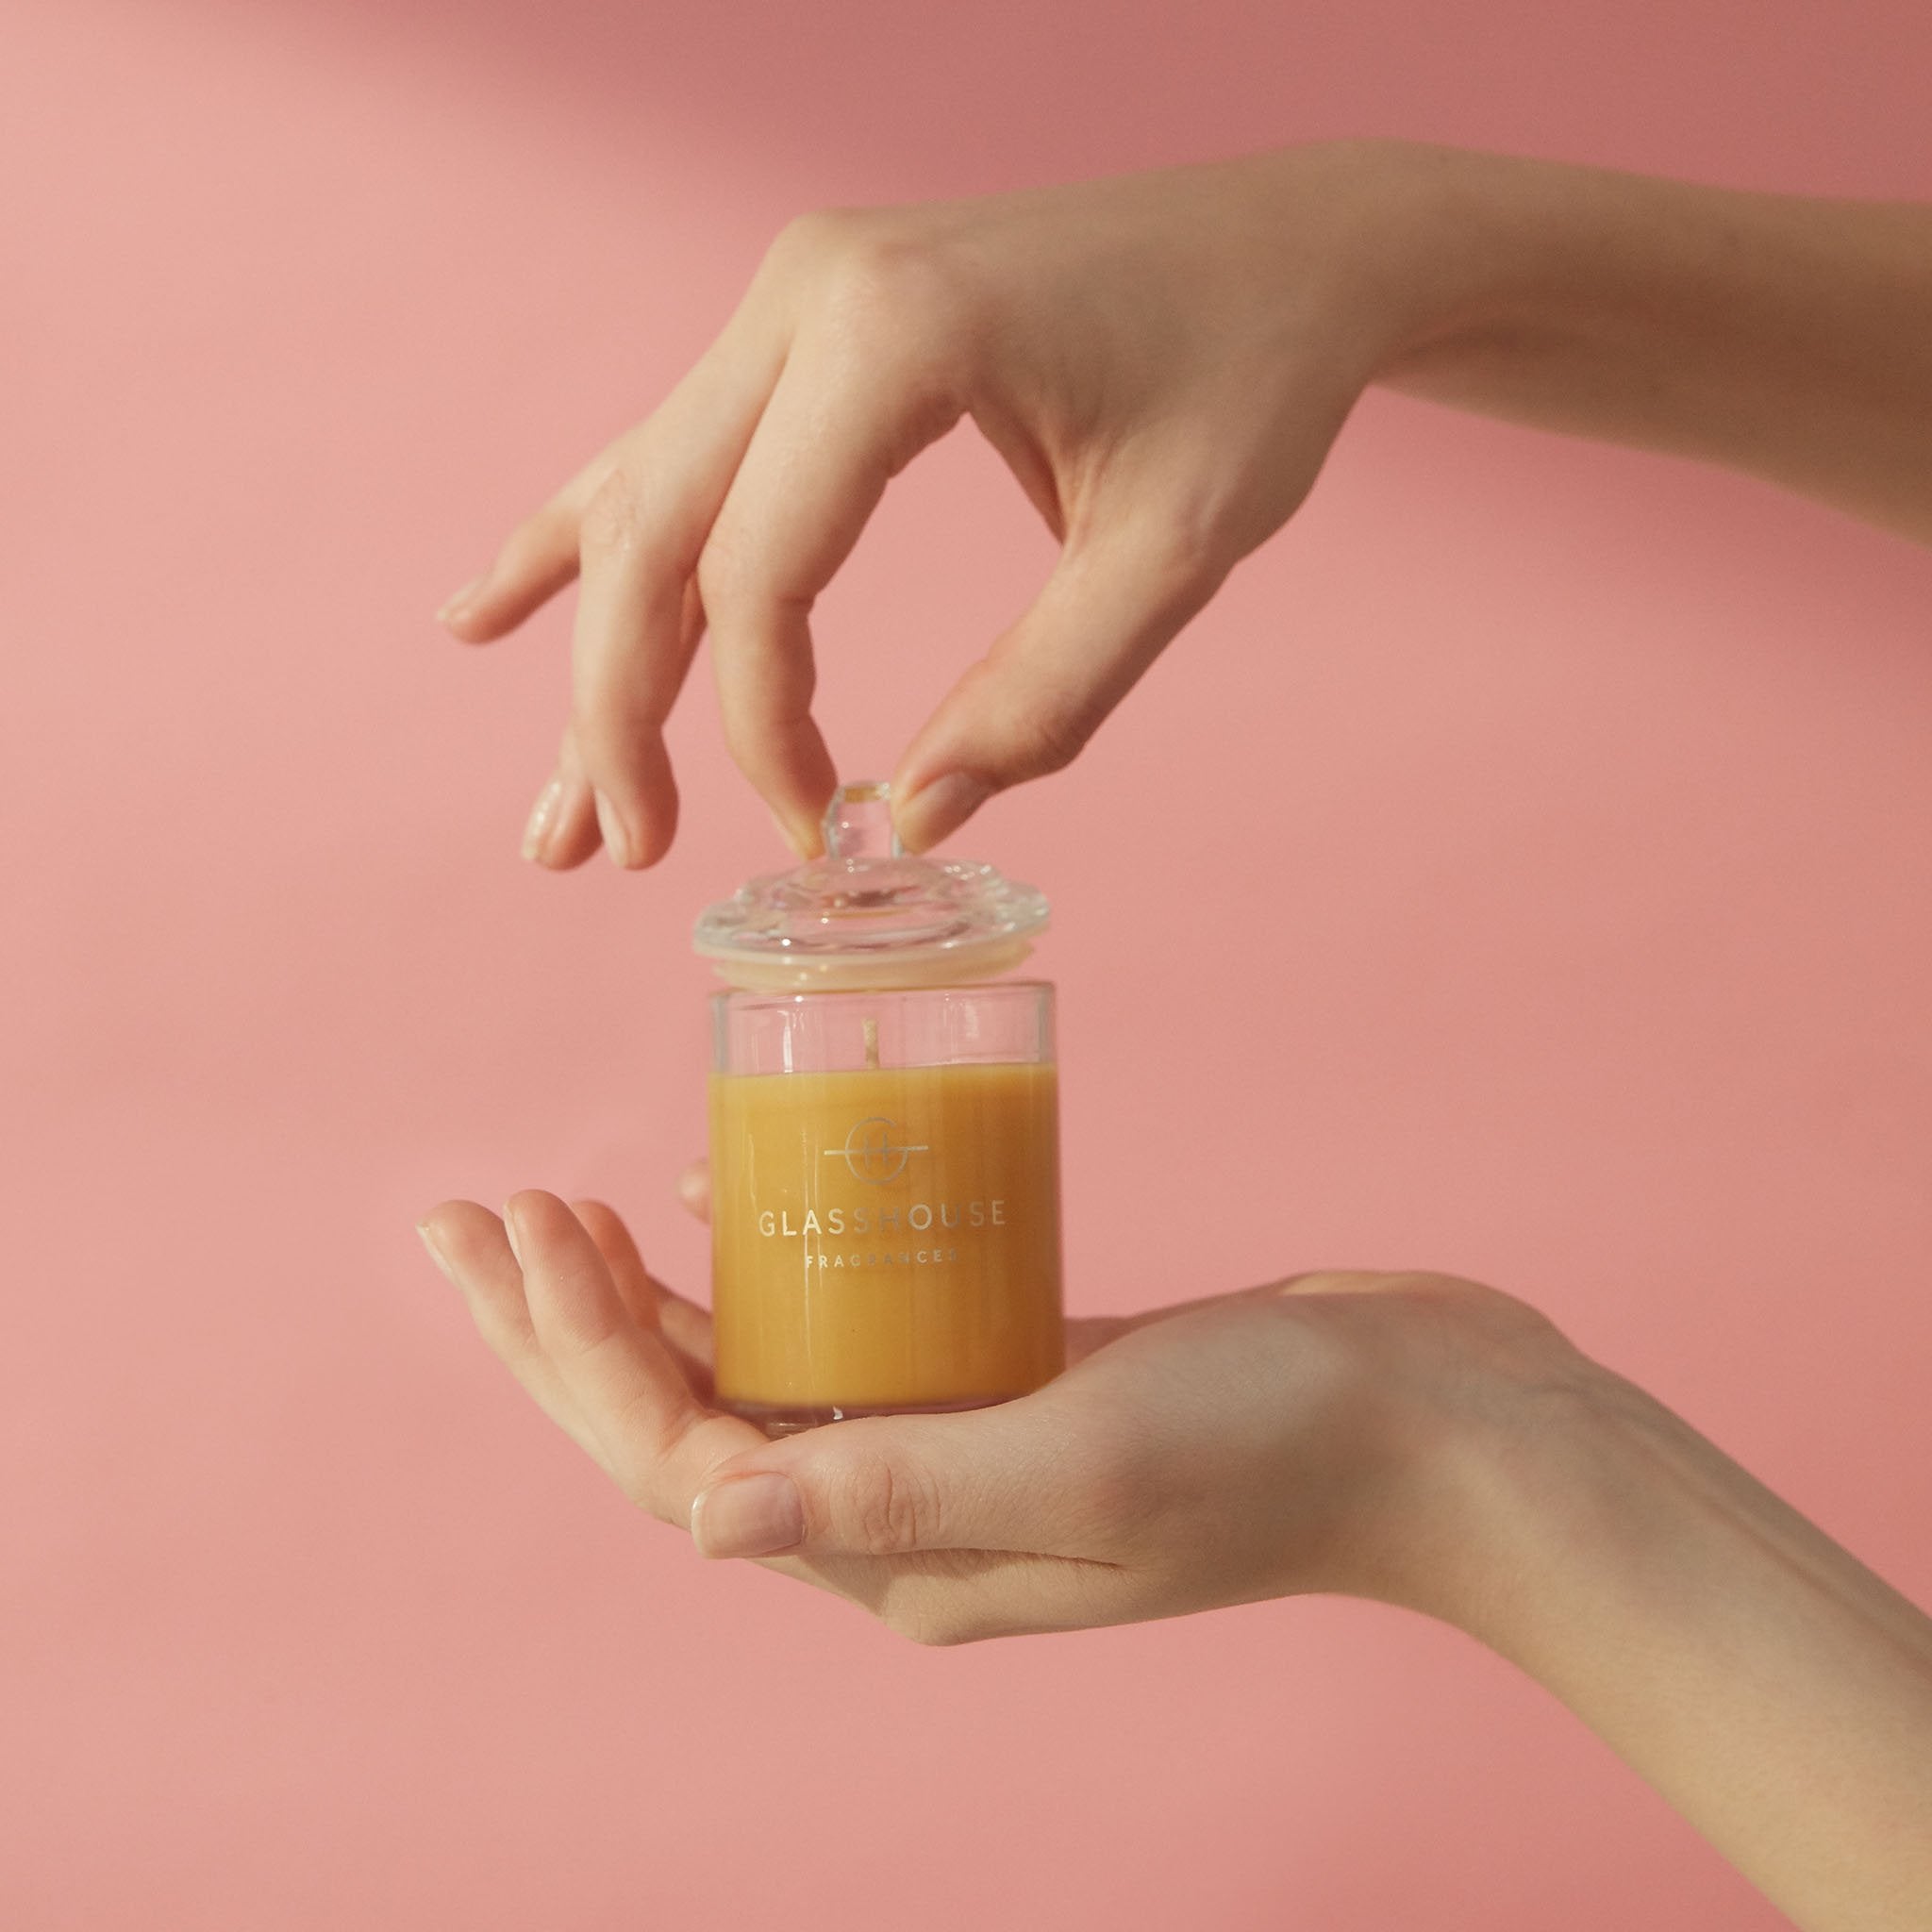 A Tahaa Affair 60g Vanilla Caramel Soy Candle held up  by a pair of hands over a peach-pink background